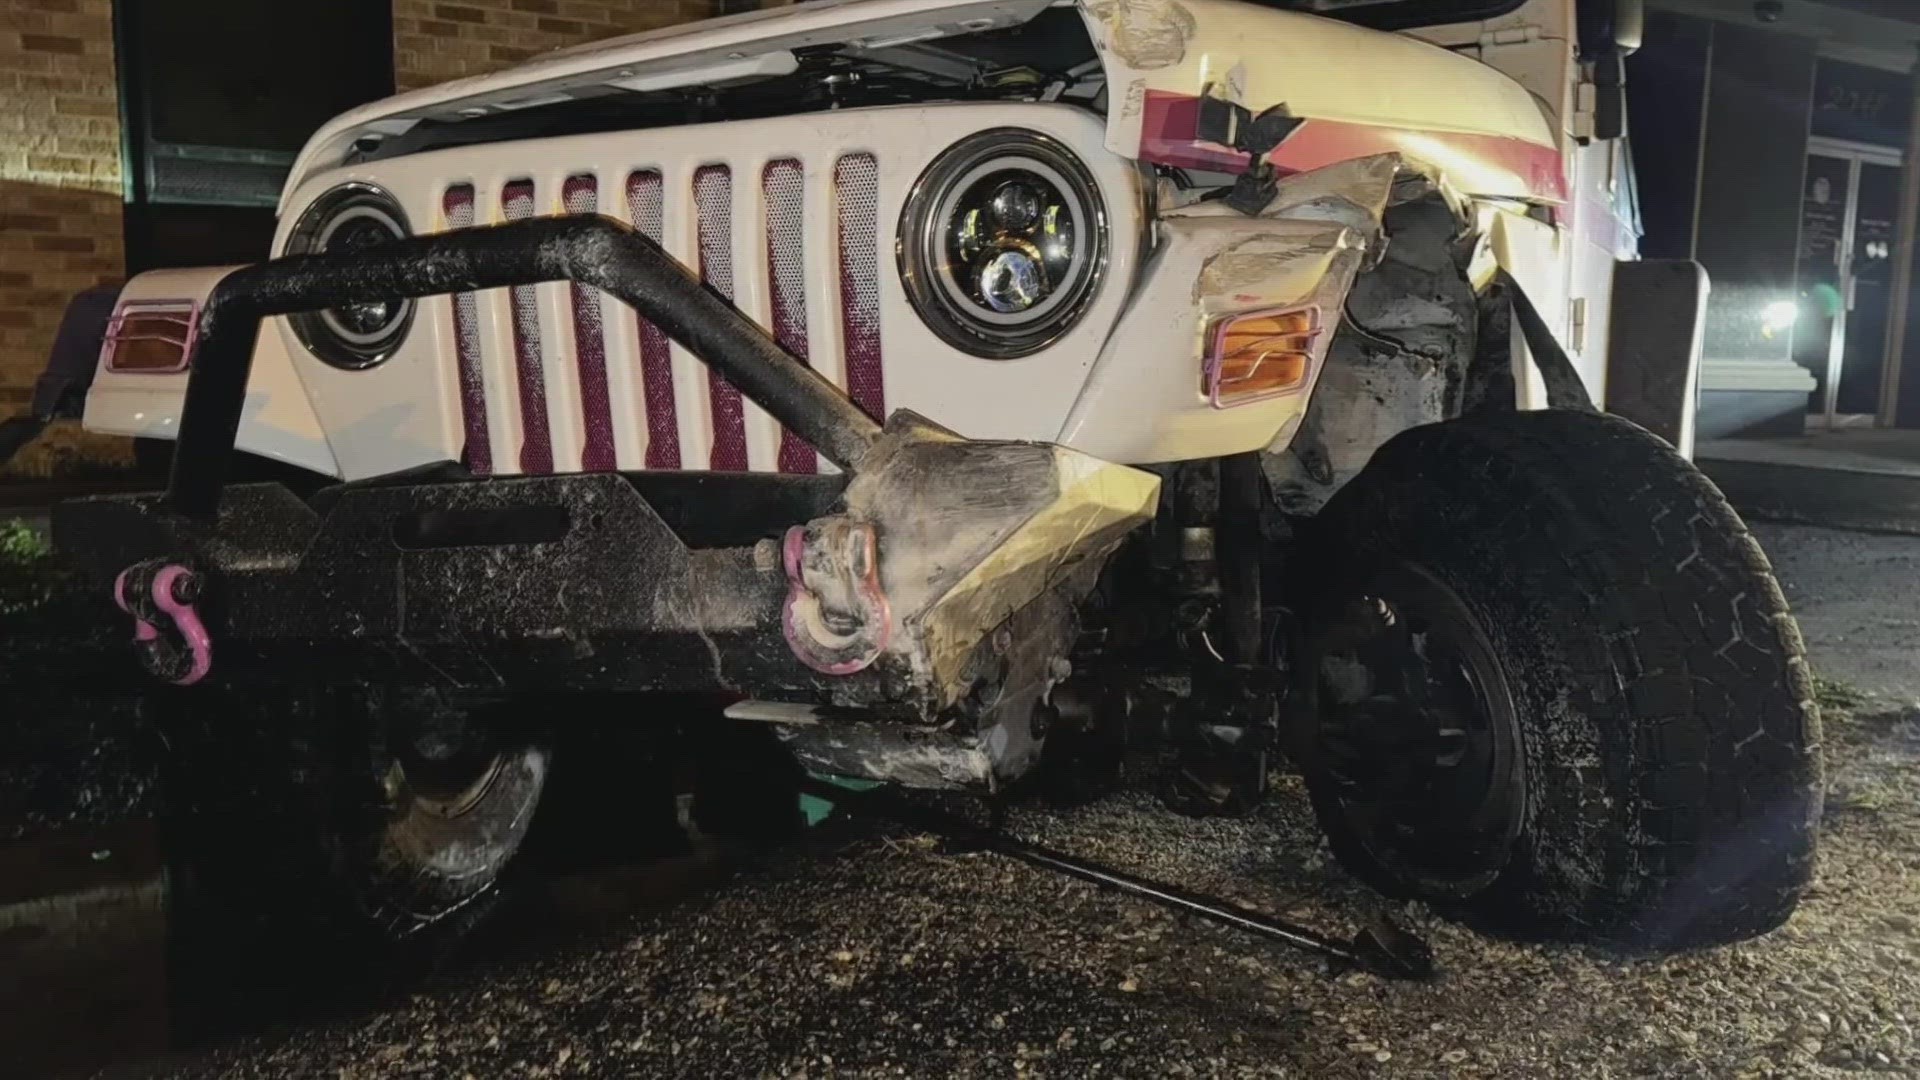 It's a story seemingly out of a "strange, but true" collection. An impaired driver slammed into a store then drove off only to be found at a bar.